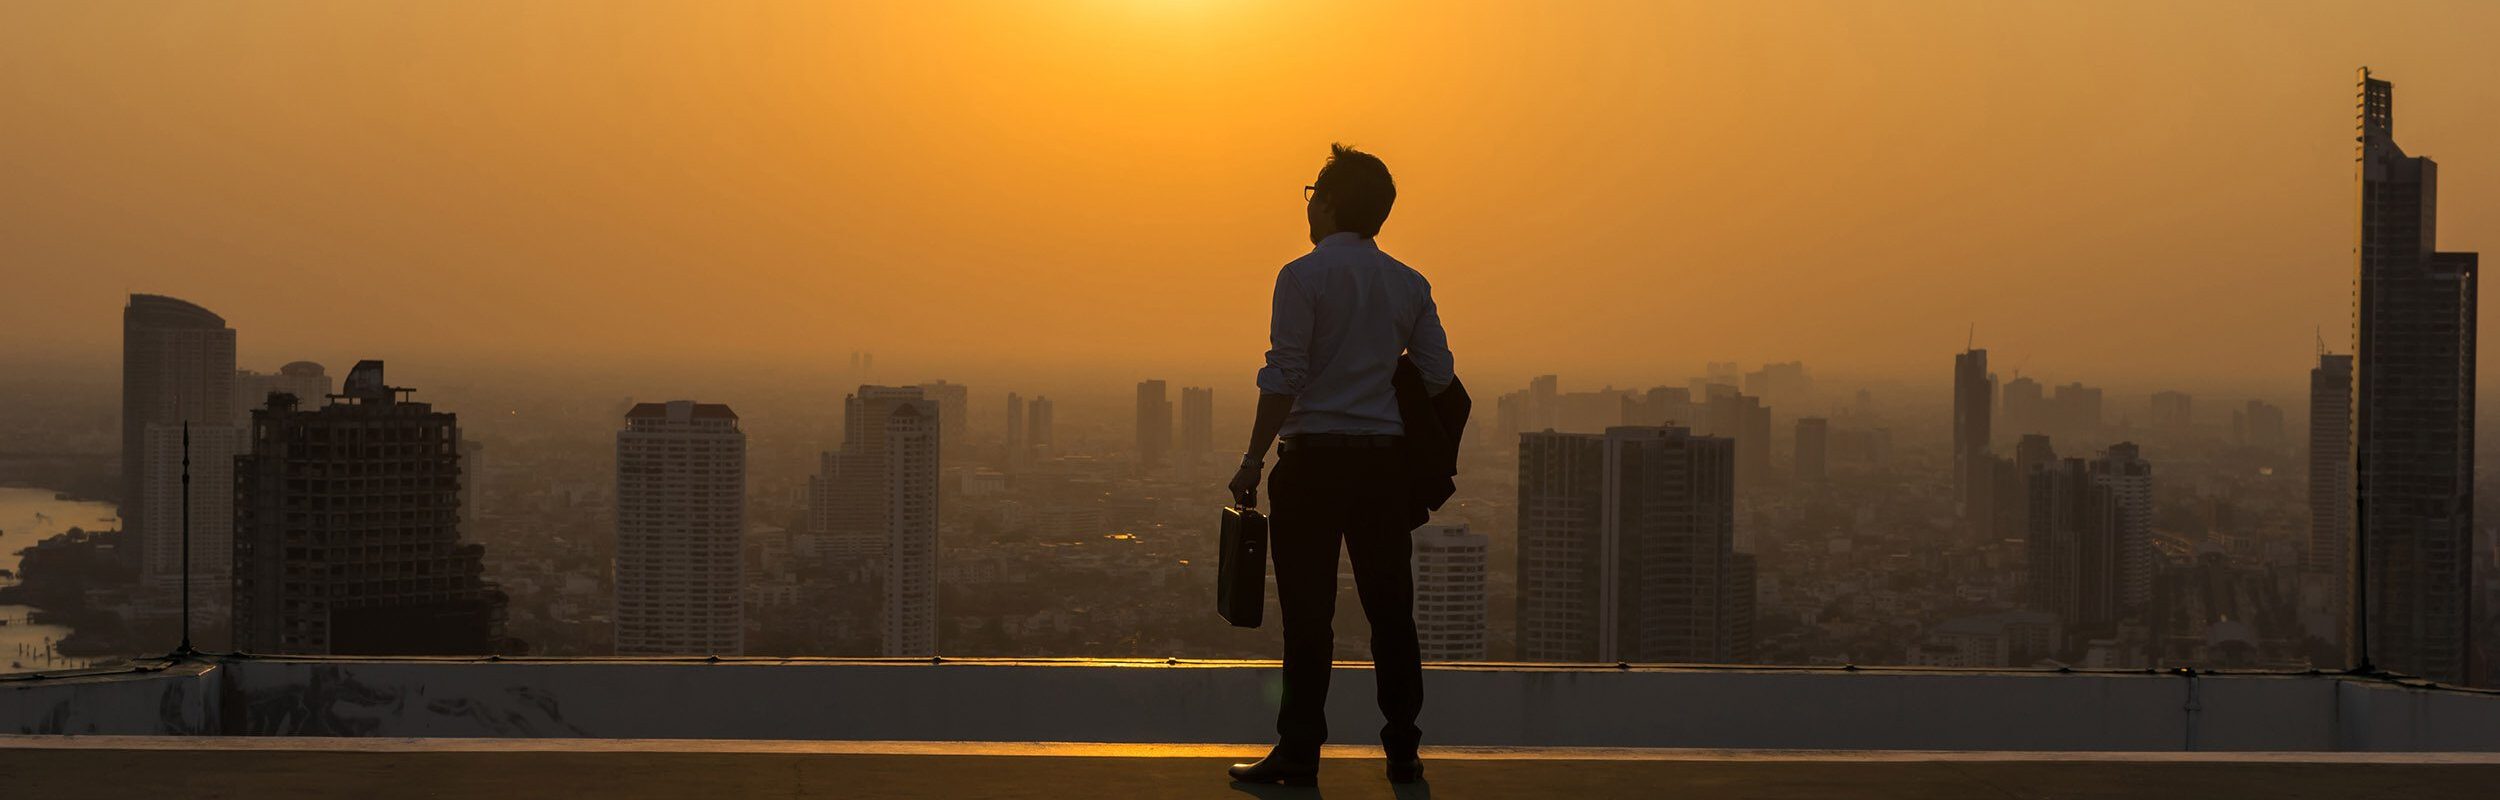 Business man looking into the sunset over a city